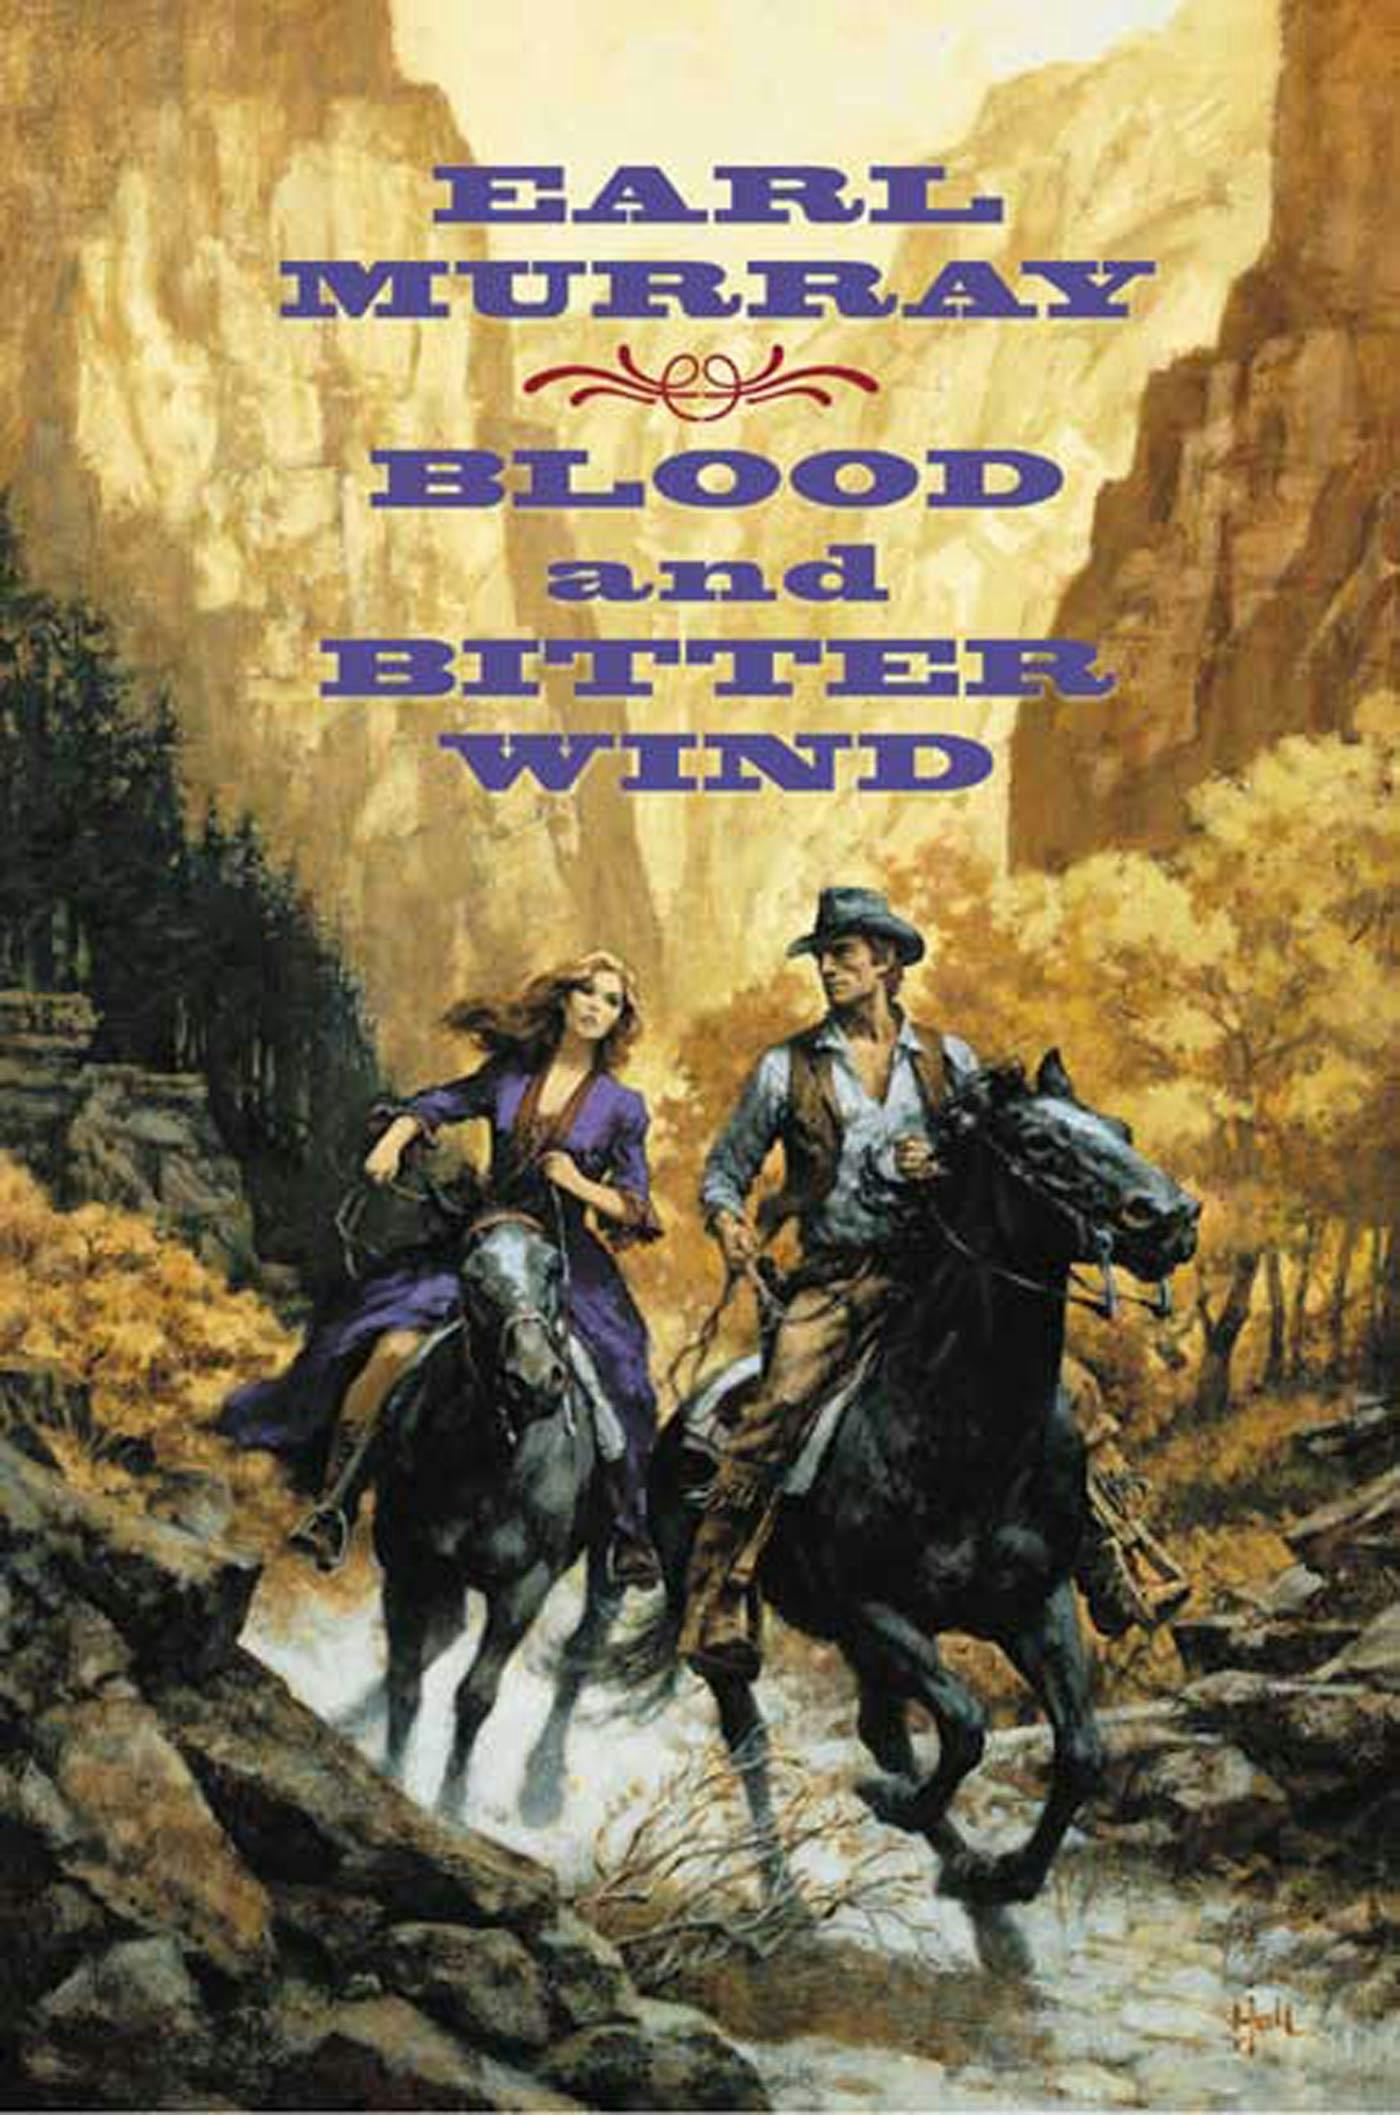 Cover for the book titled as: Blood and Bitter Wind